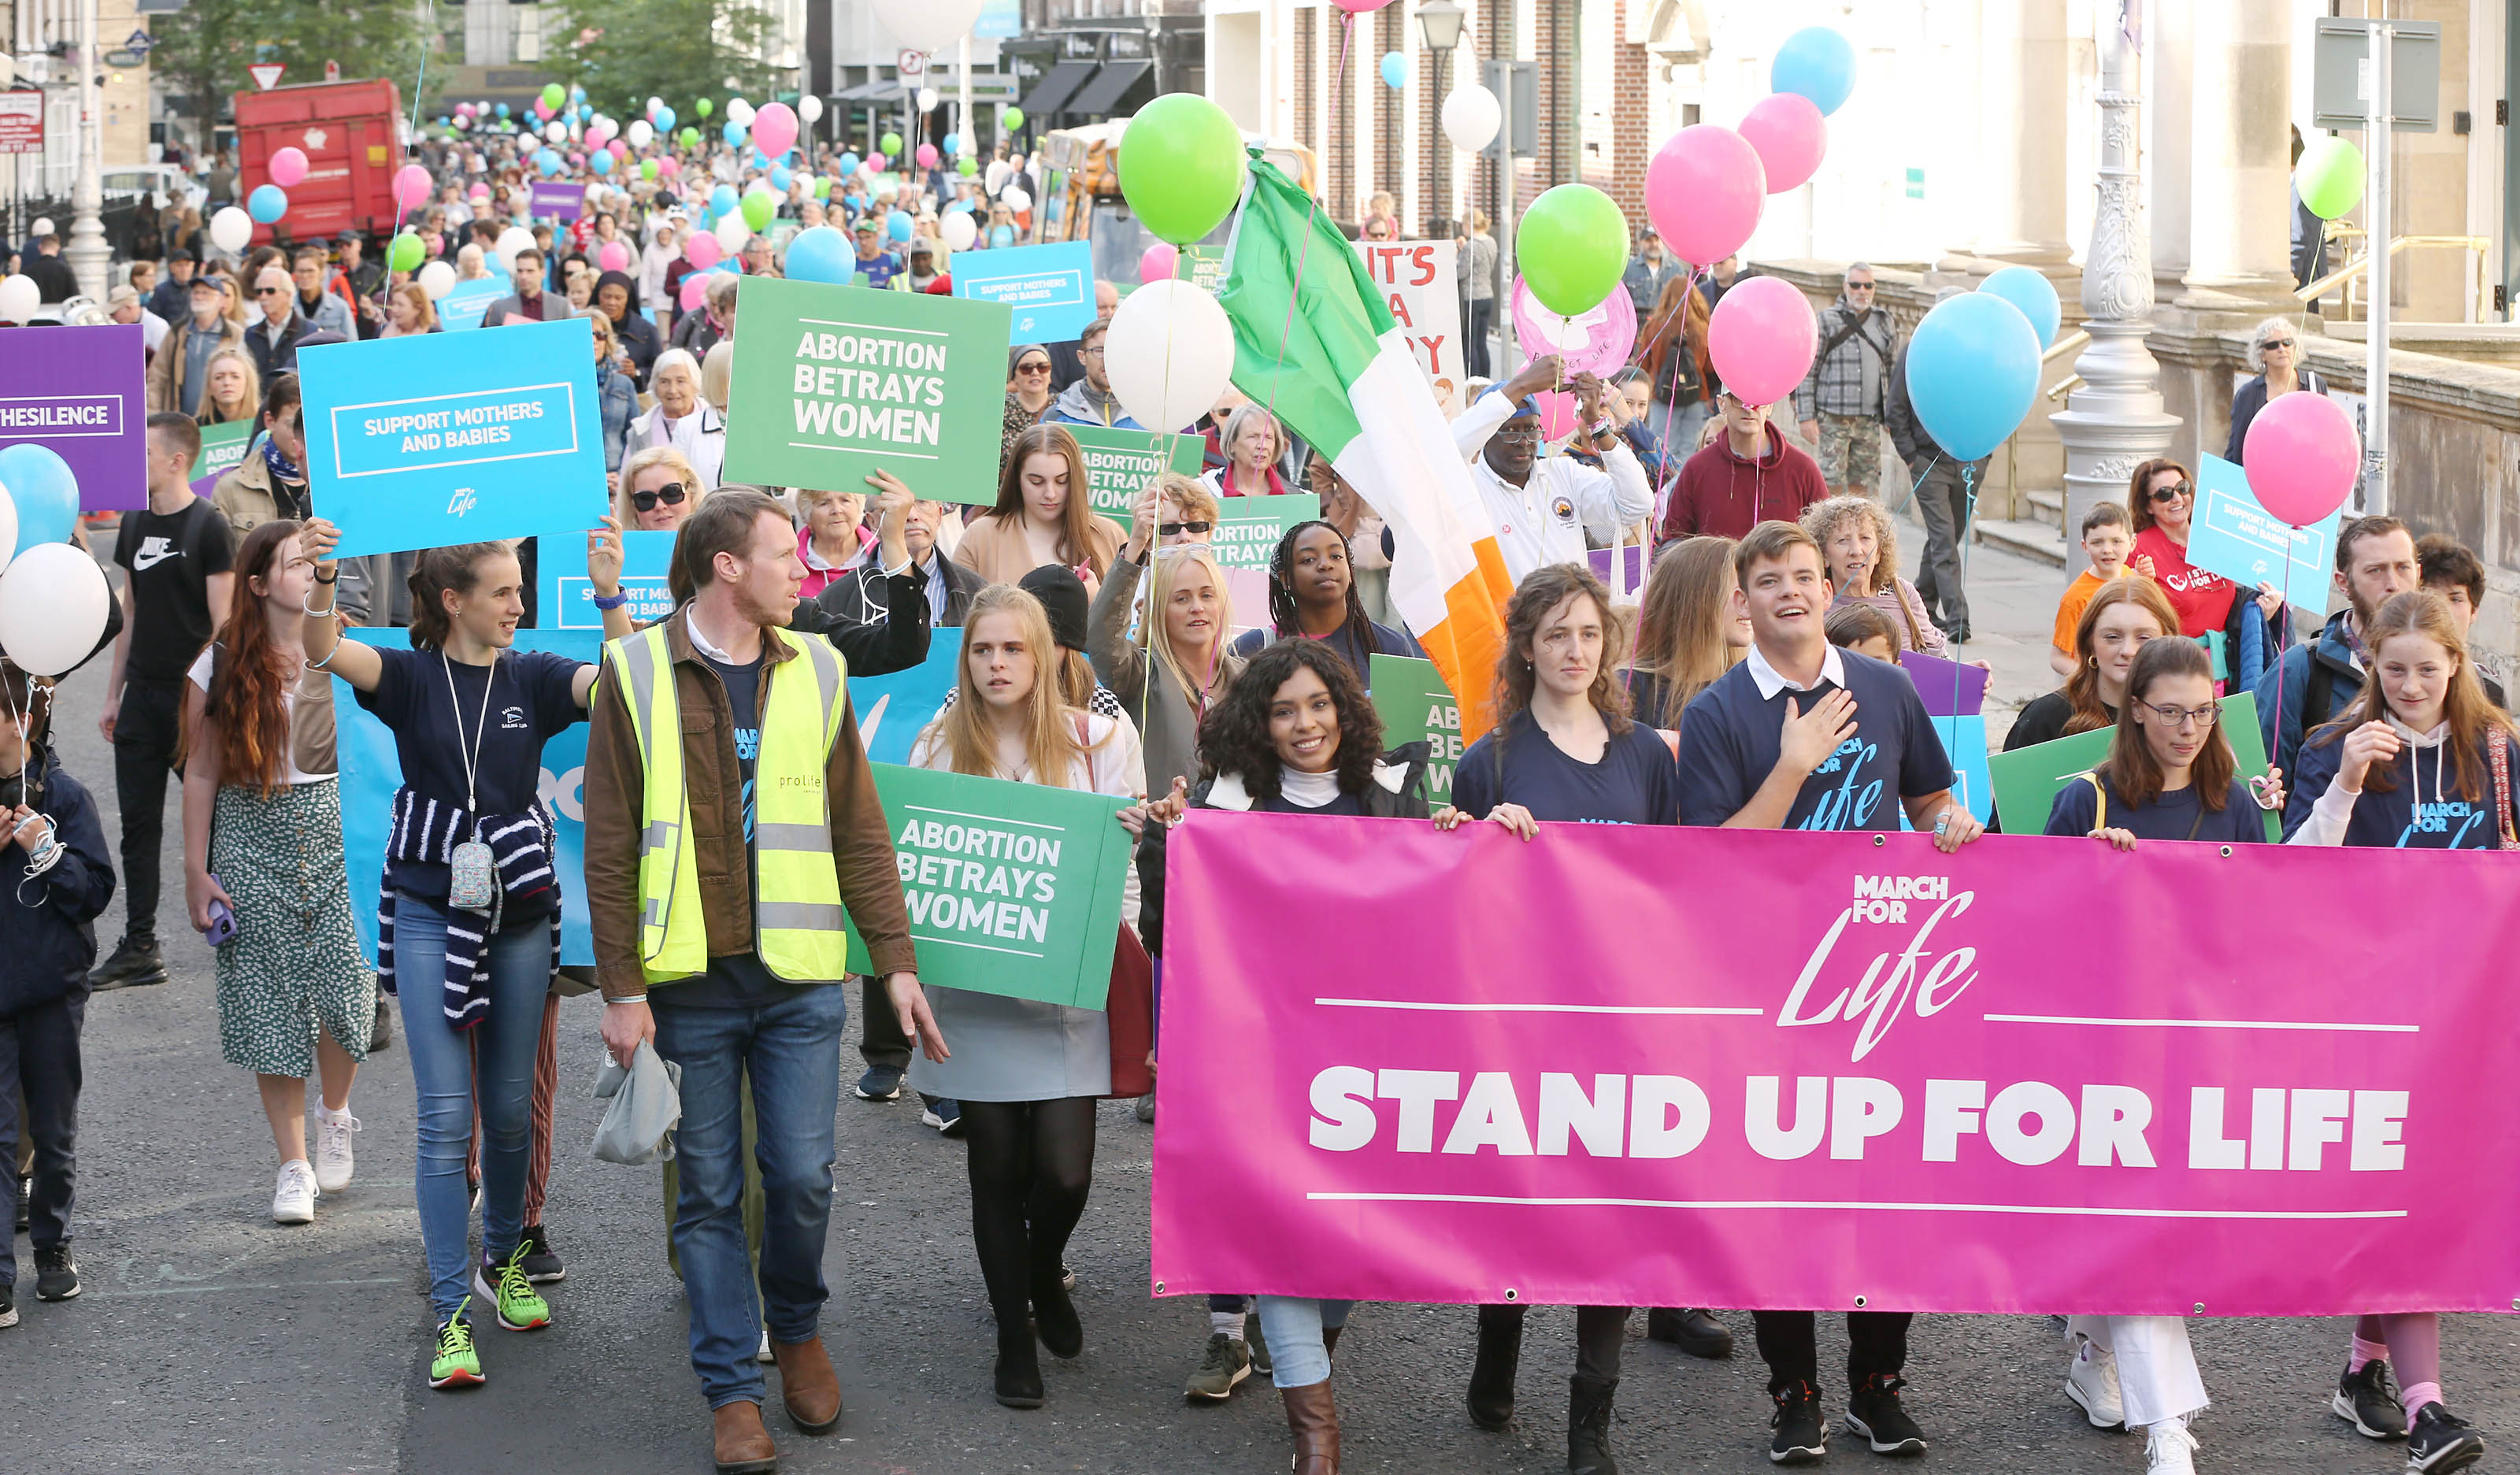 24.04.2023 – Thousands to gather at March For Life on Bank Holiday Monday in response to extreme recommendations contained in abortion review